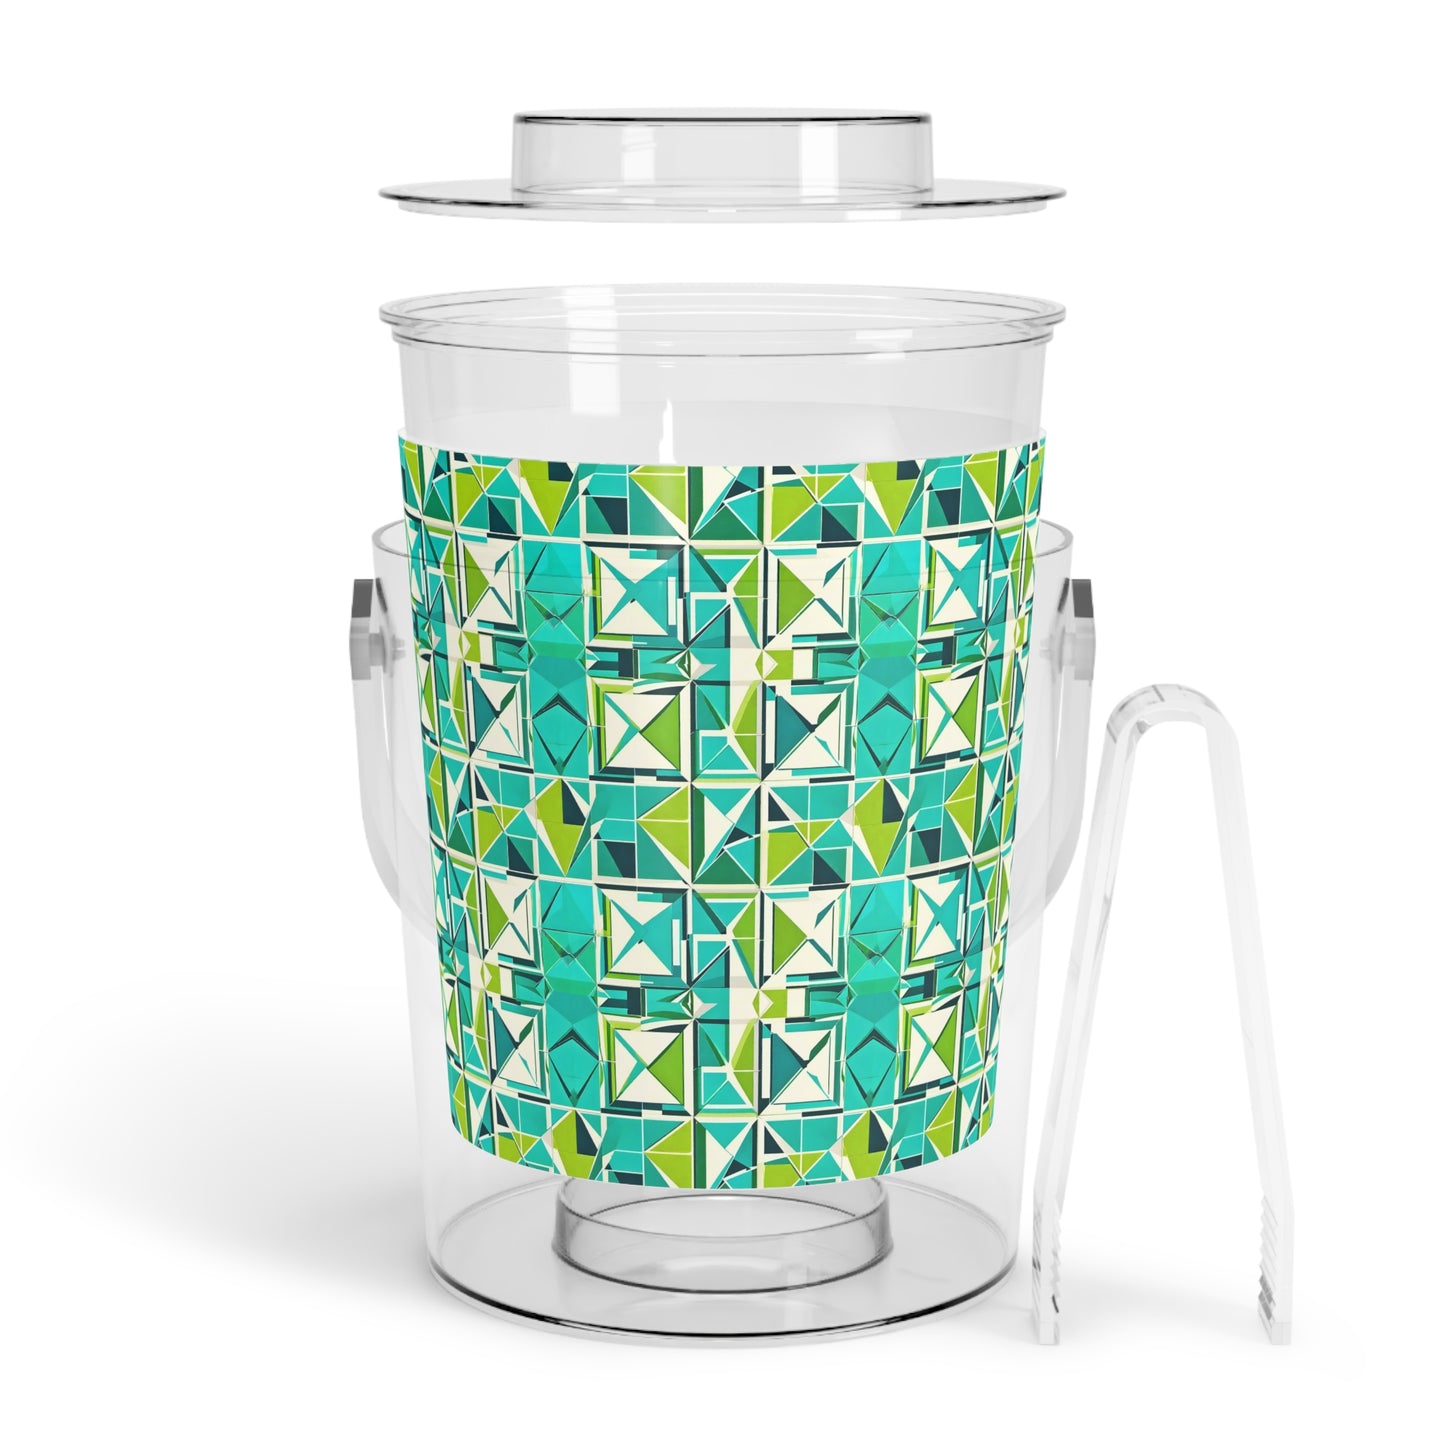 Cancun Vacation Midcentury Modern Tile Turquoise and Green Geometric Pattern Patio Summertime Outdoor Party Ice Bucket with Tongs